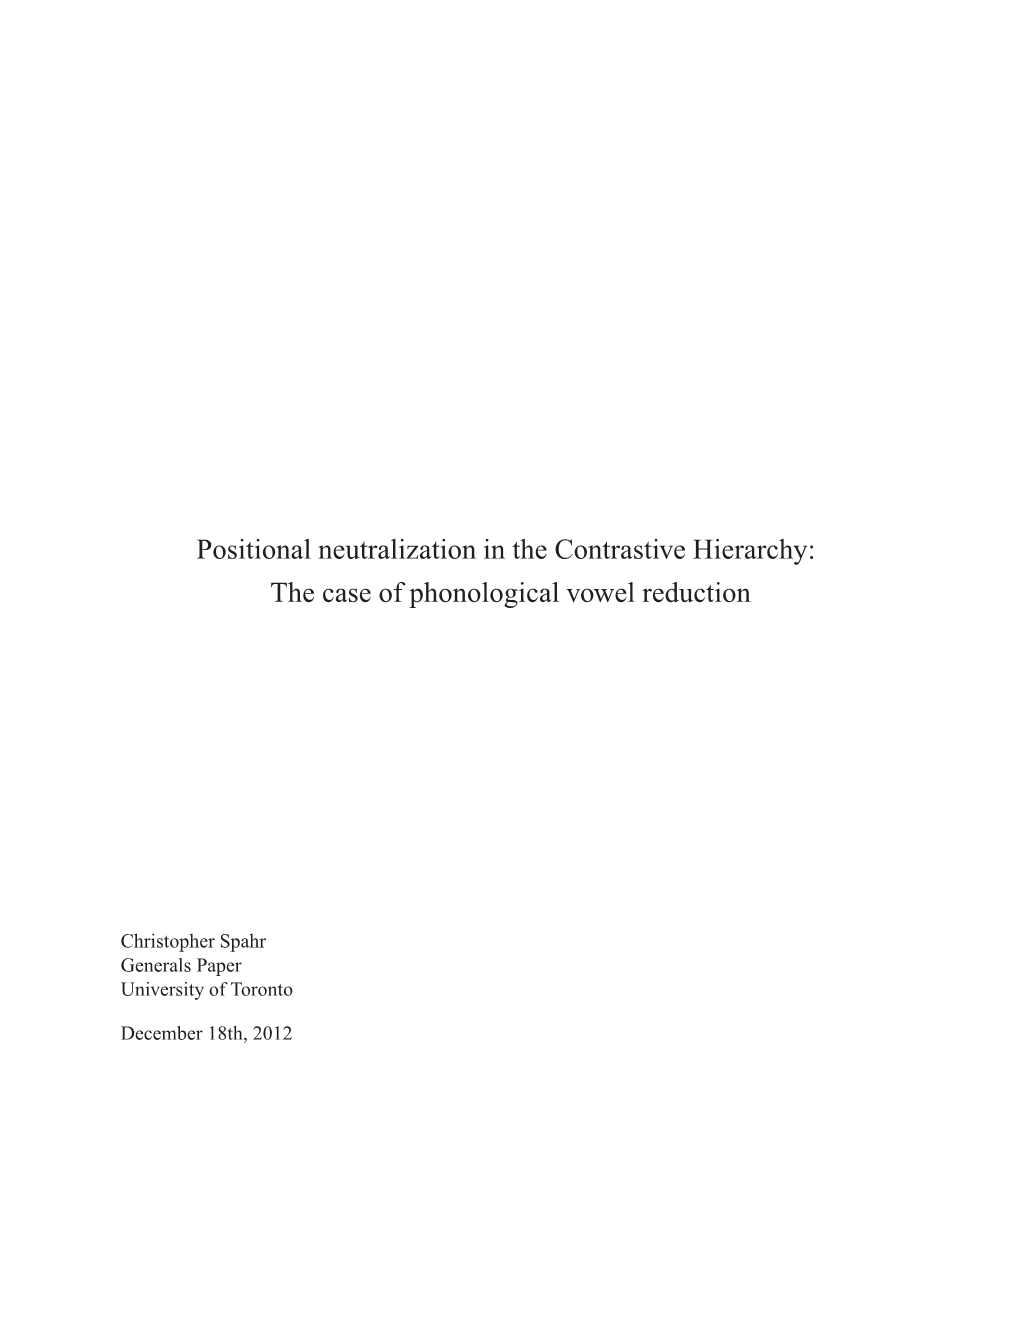 Positional Neutralization in the Contrastive Hierarchy: the Case of Phonological Vowel Reduction